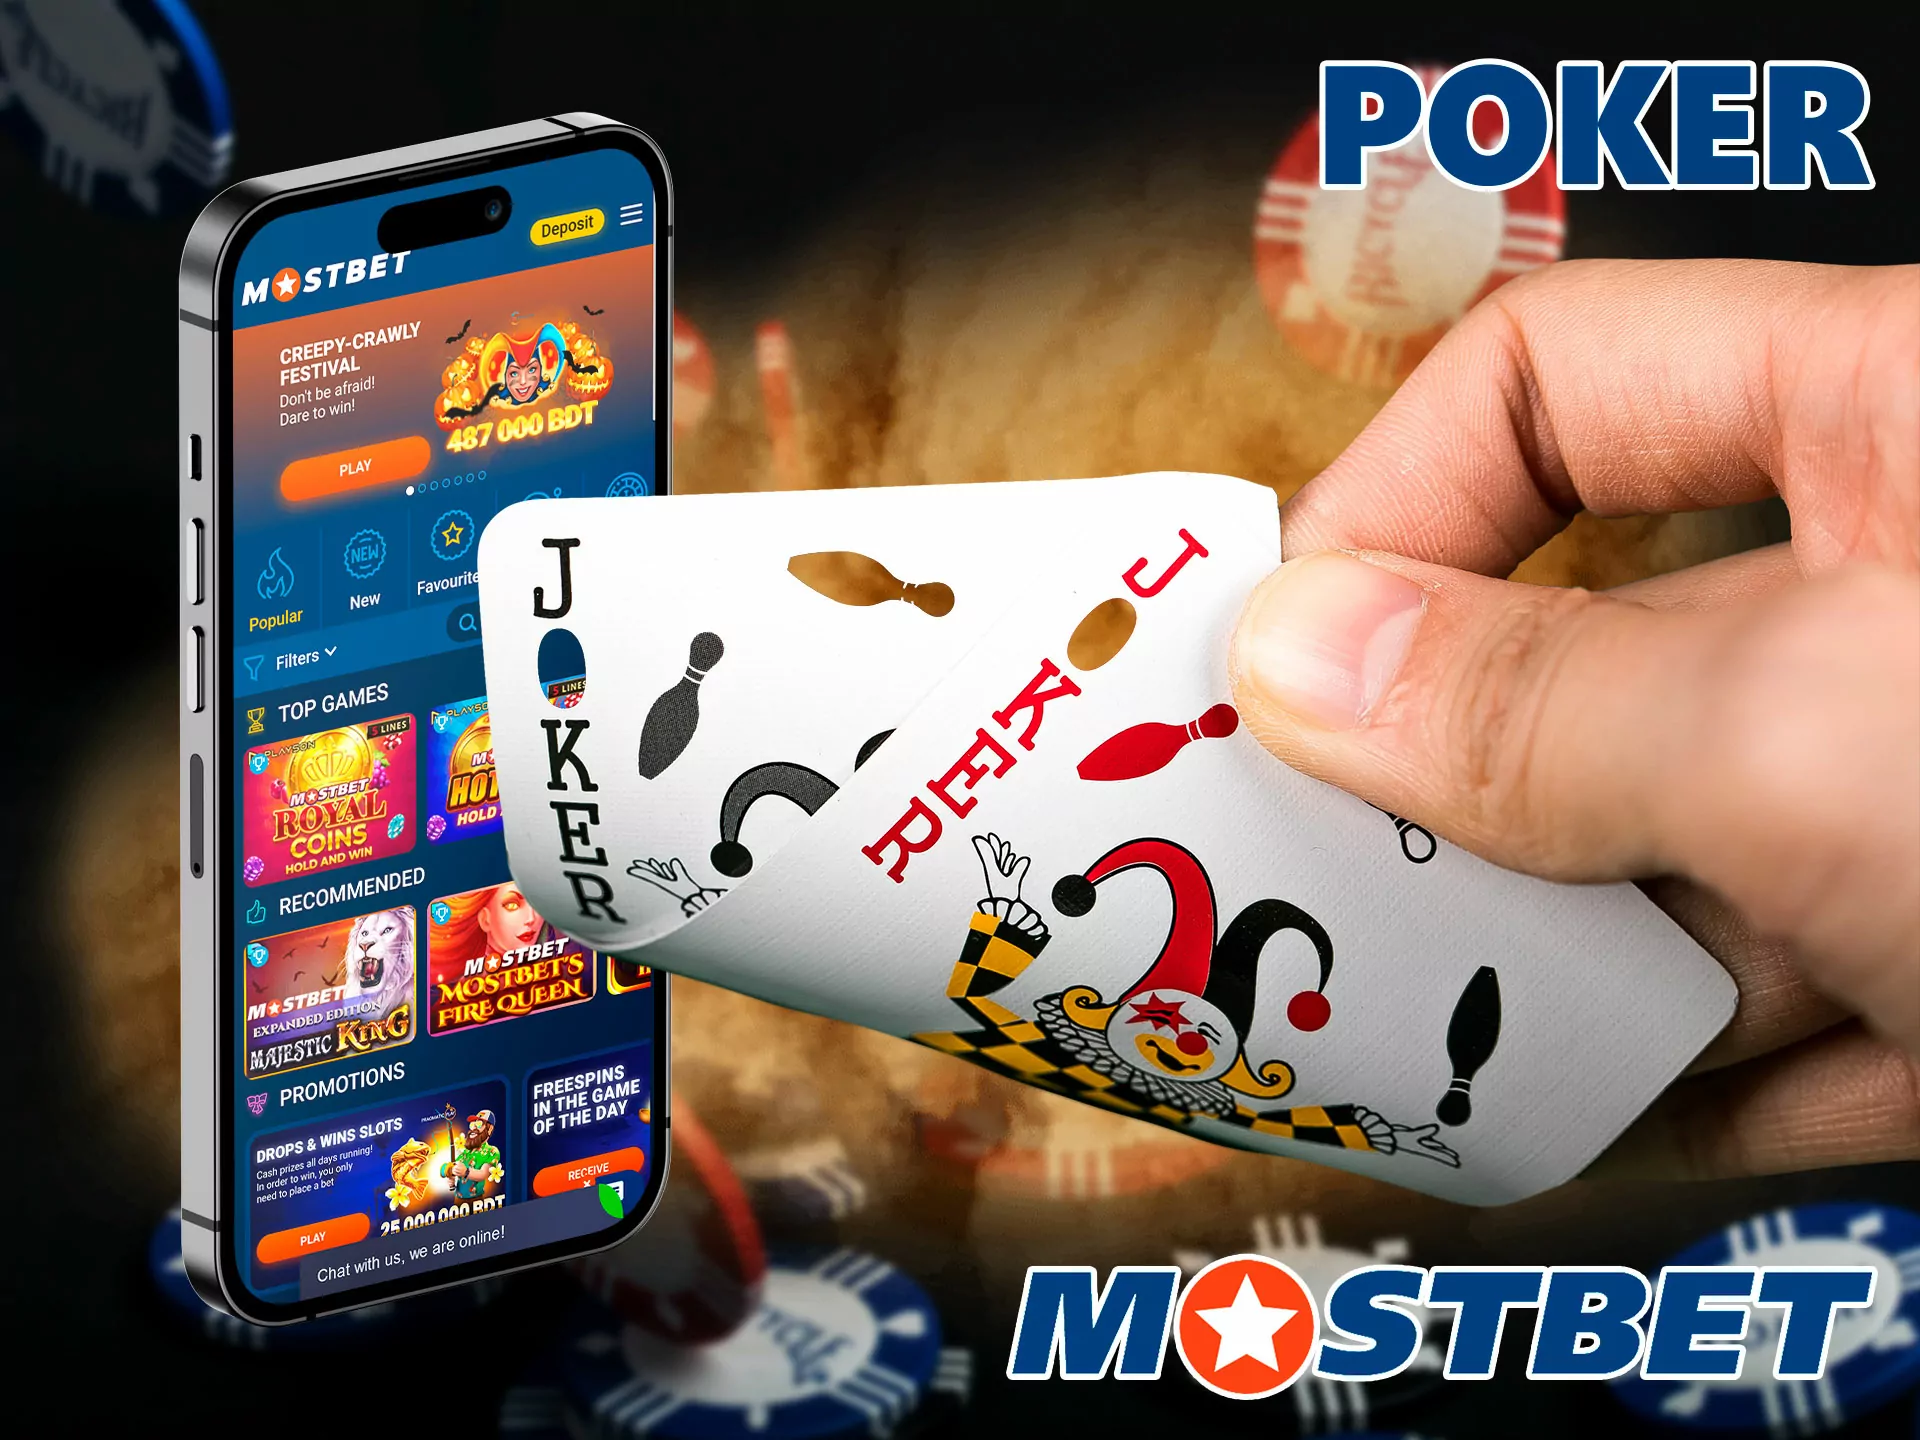 This is an exciting card game available at Mostbet, where the player must win in order to win: defeat opponents by making them fold or collect the strongest combination of cards.